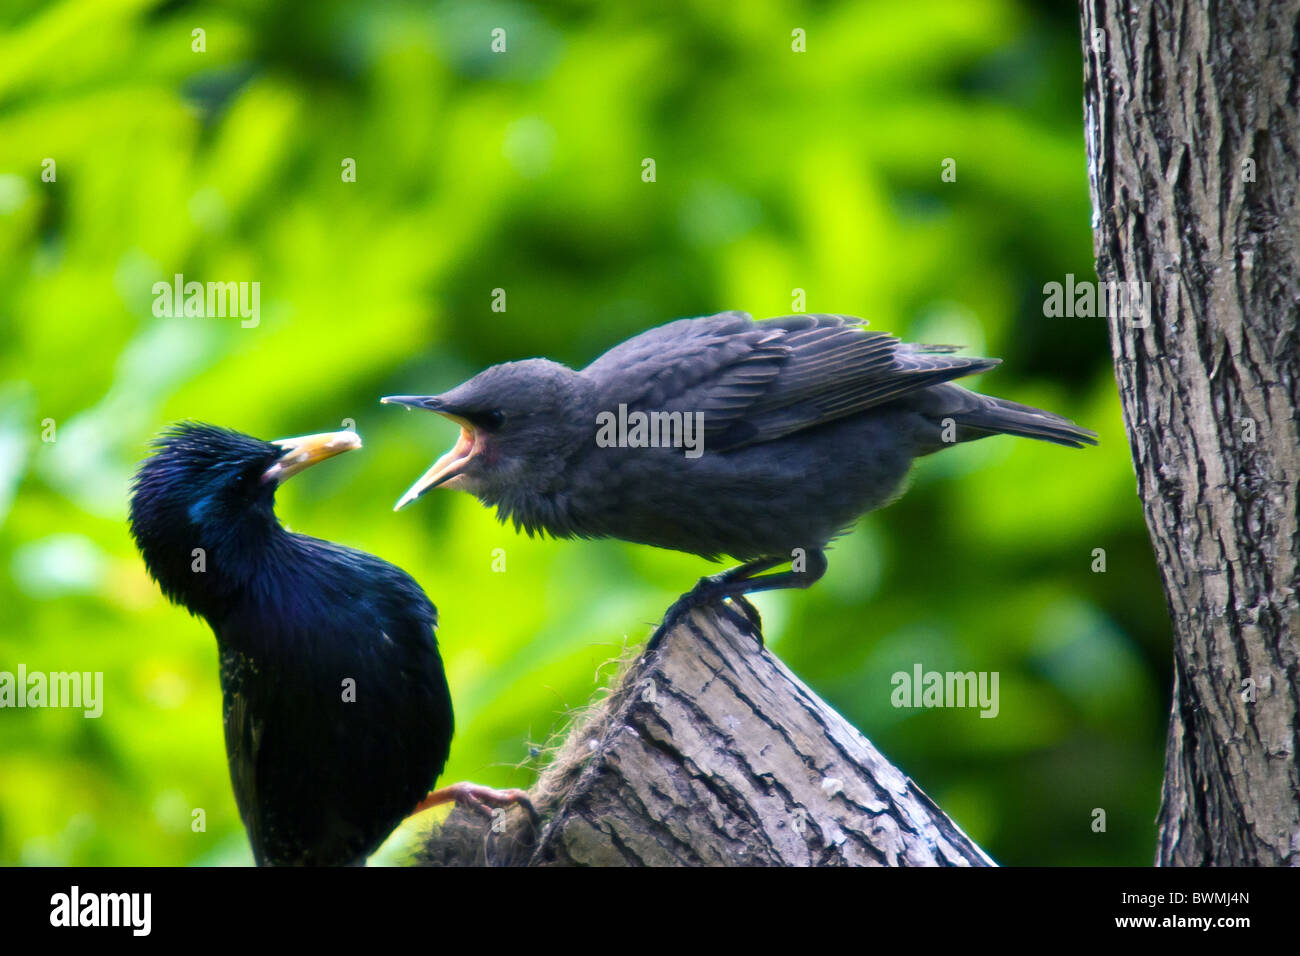 A starling feeds its young fledgling with suet from a garden feeder, whilst standing on a log. Late spring in the garden. Stock Photo